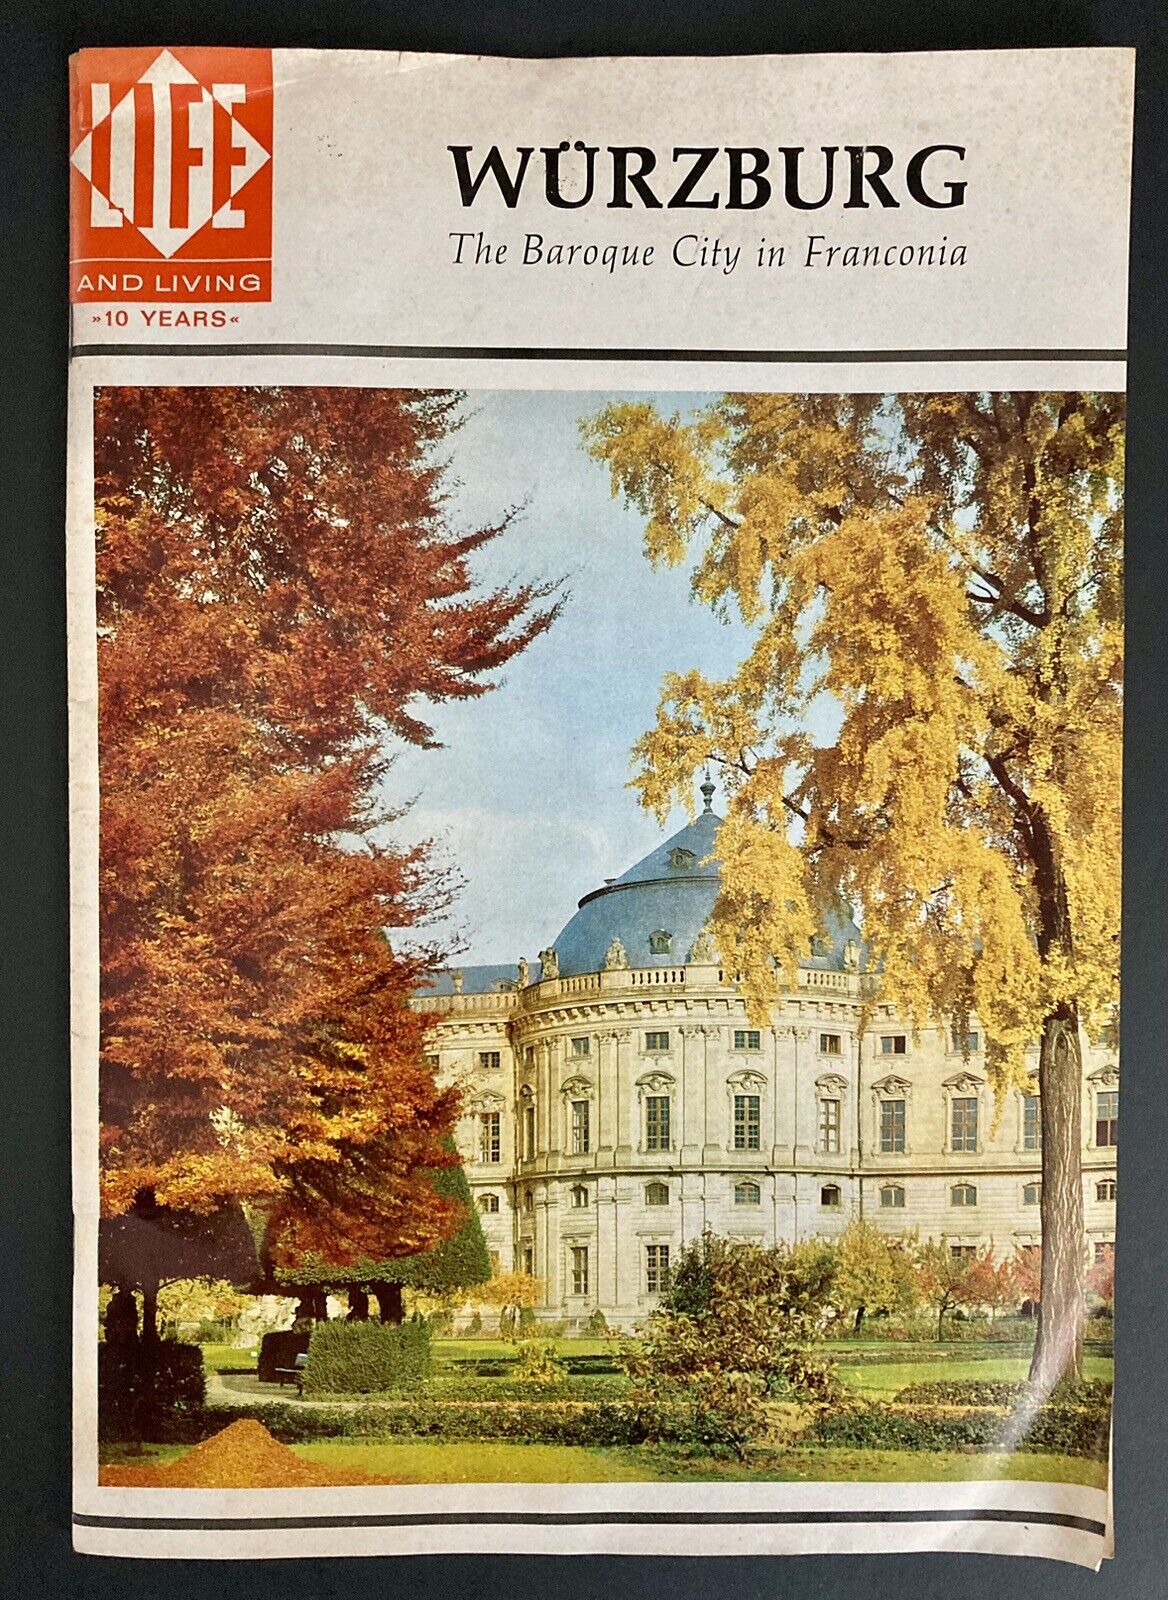 Vintage 1969 The Wurzburg Baroque City in Franconia American Military Guidebook